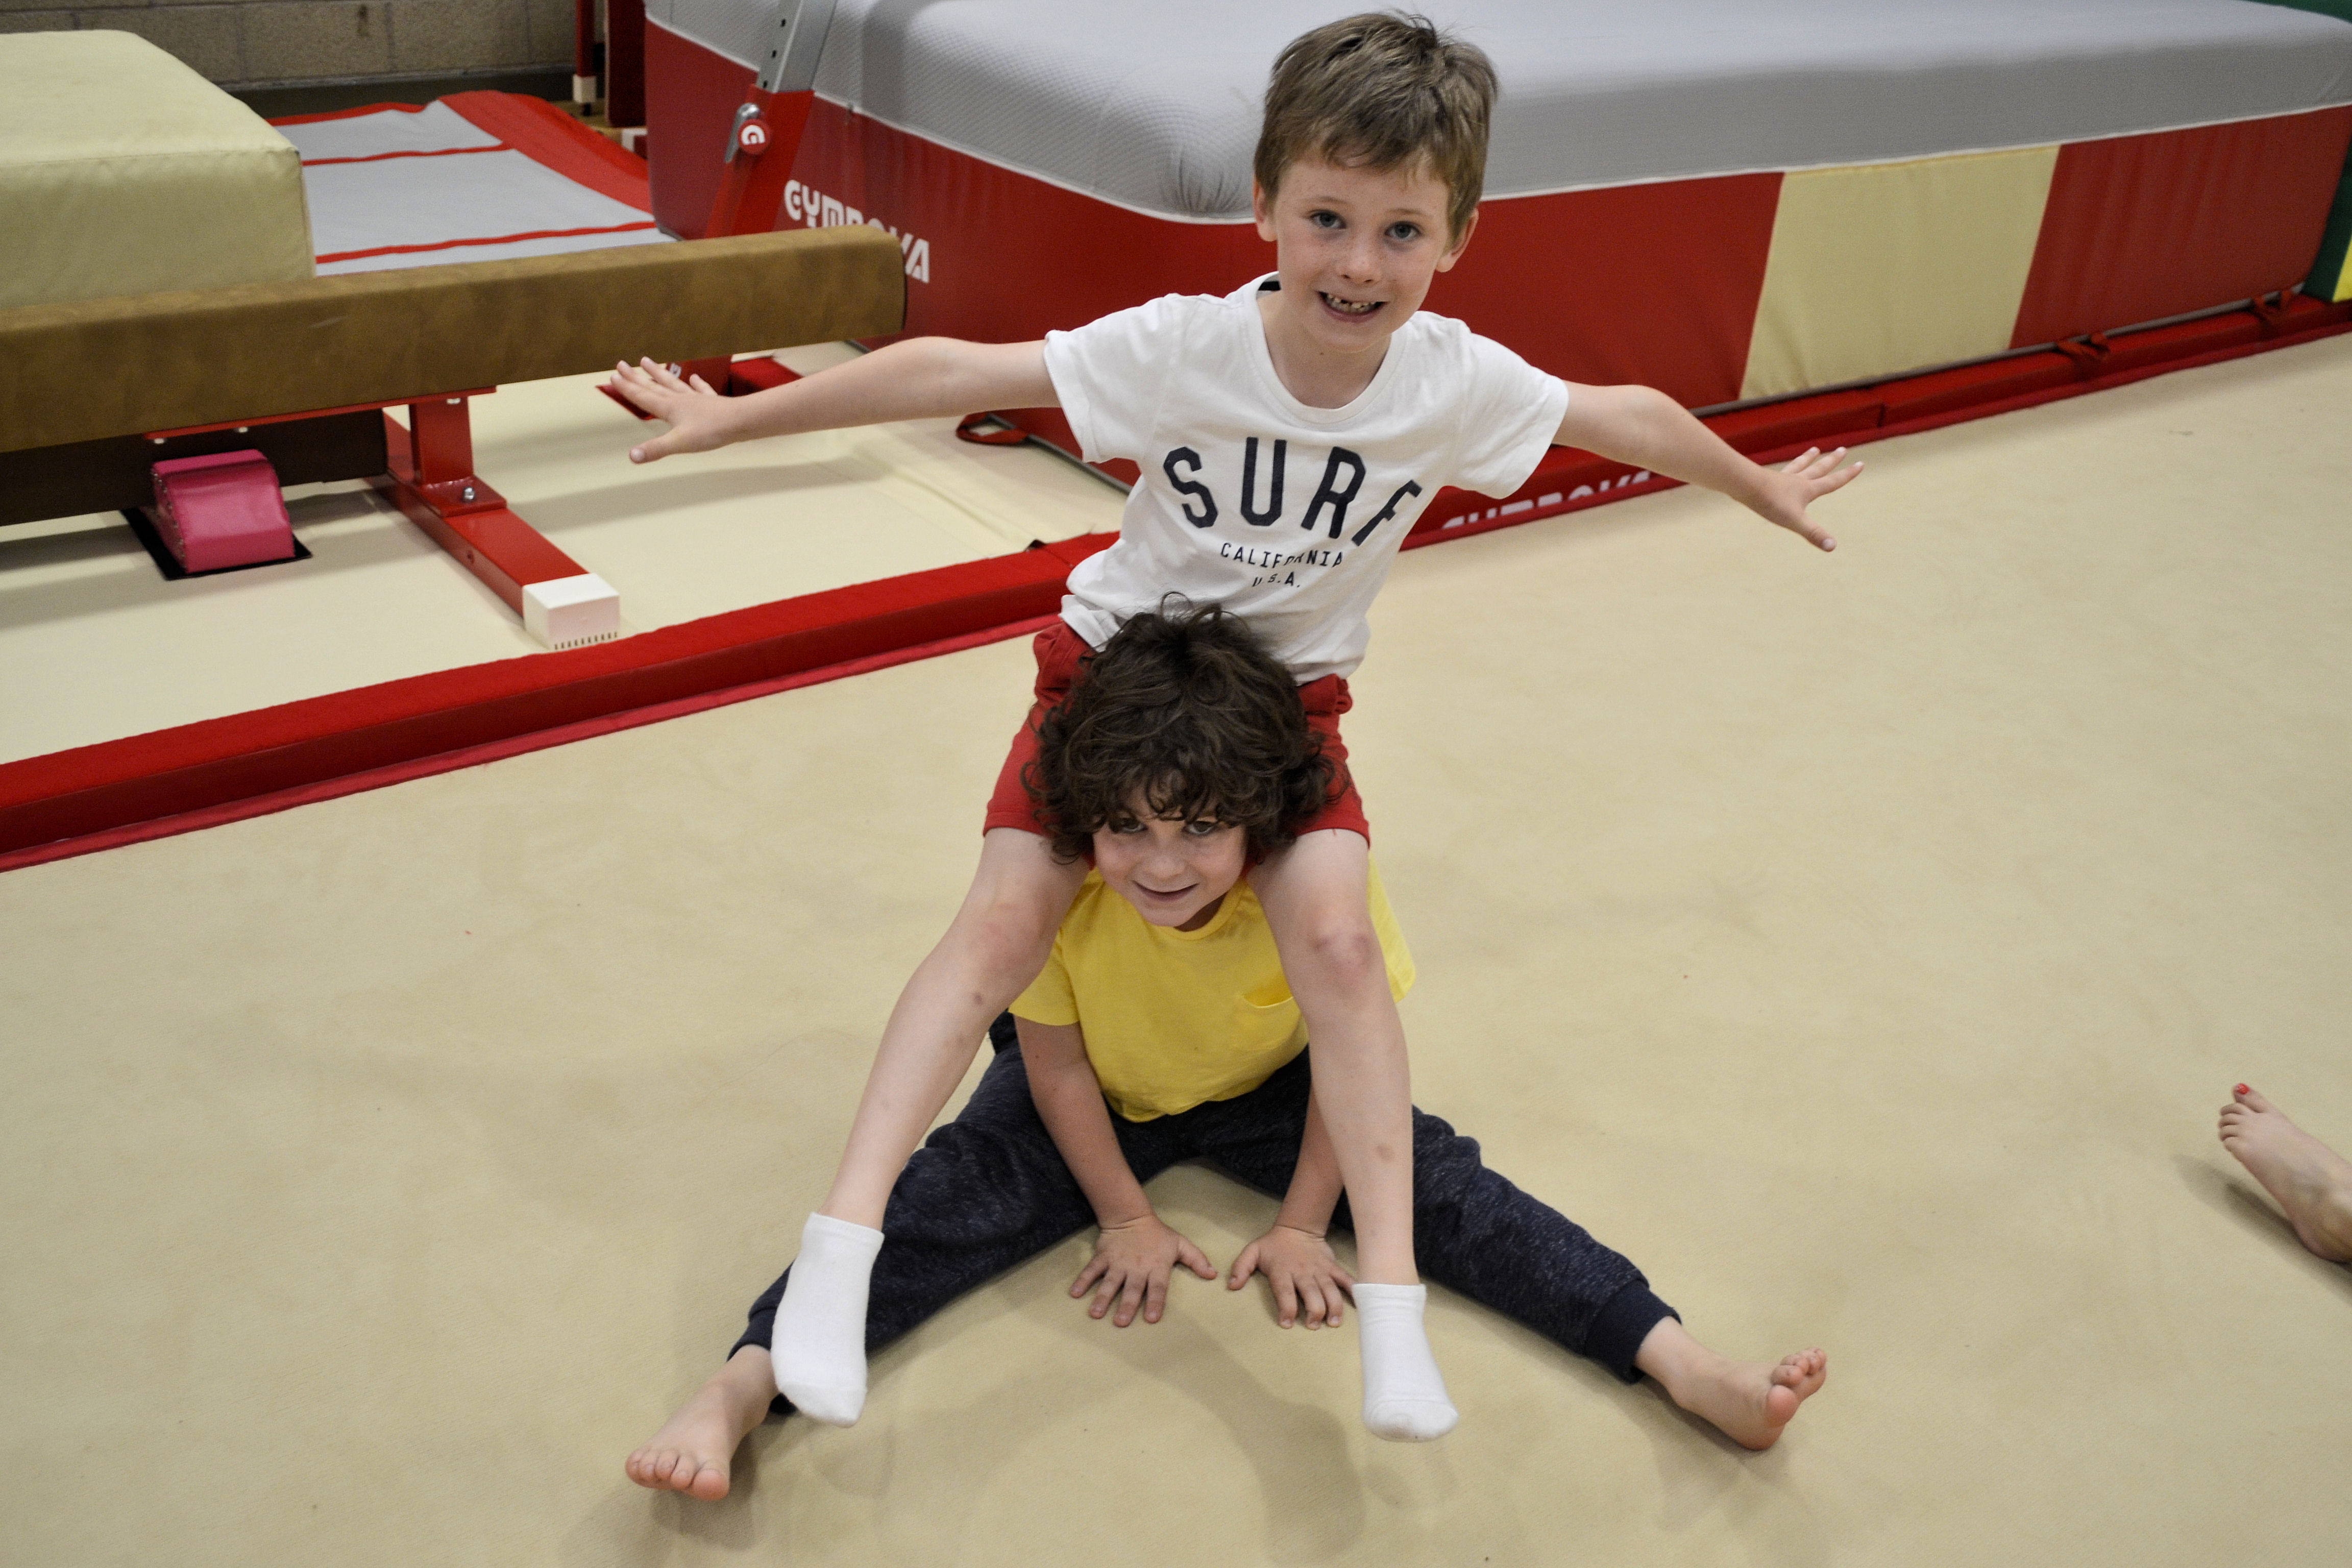 image of Gymnastics - boy sitting with another boy on his shoulders with arms out